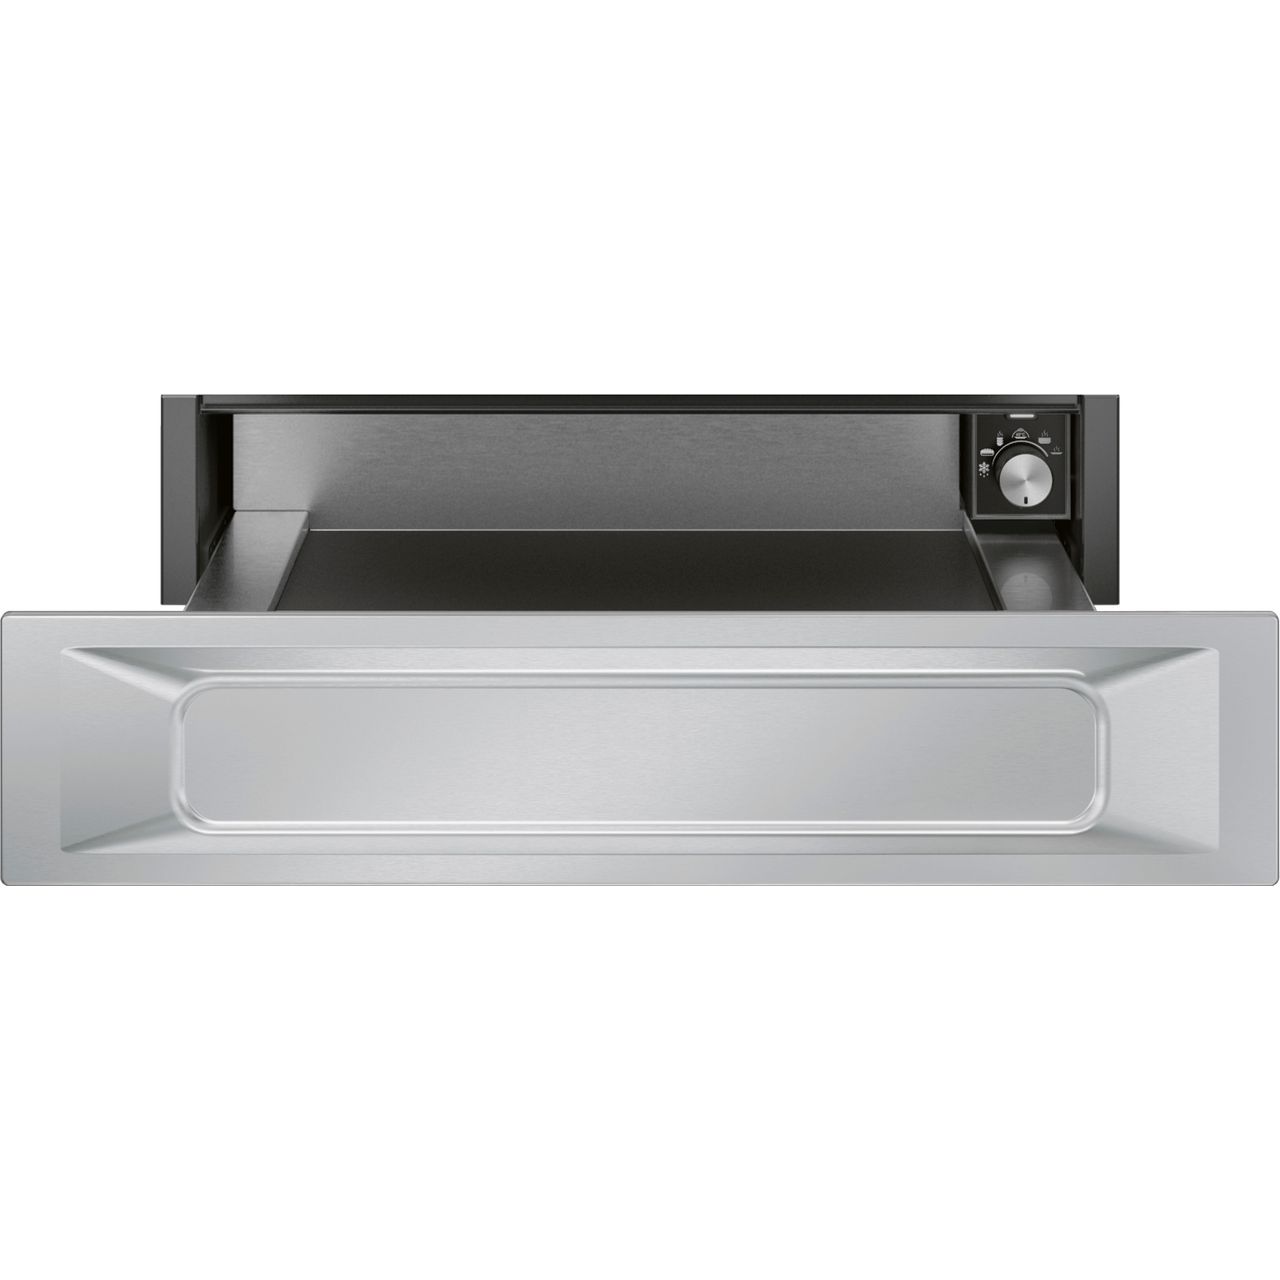 Smeg Victoria CPR915X Built In Warming Drawer Review